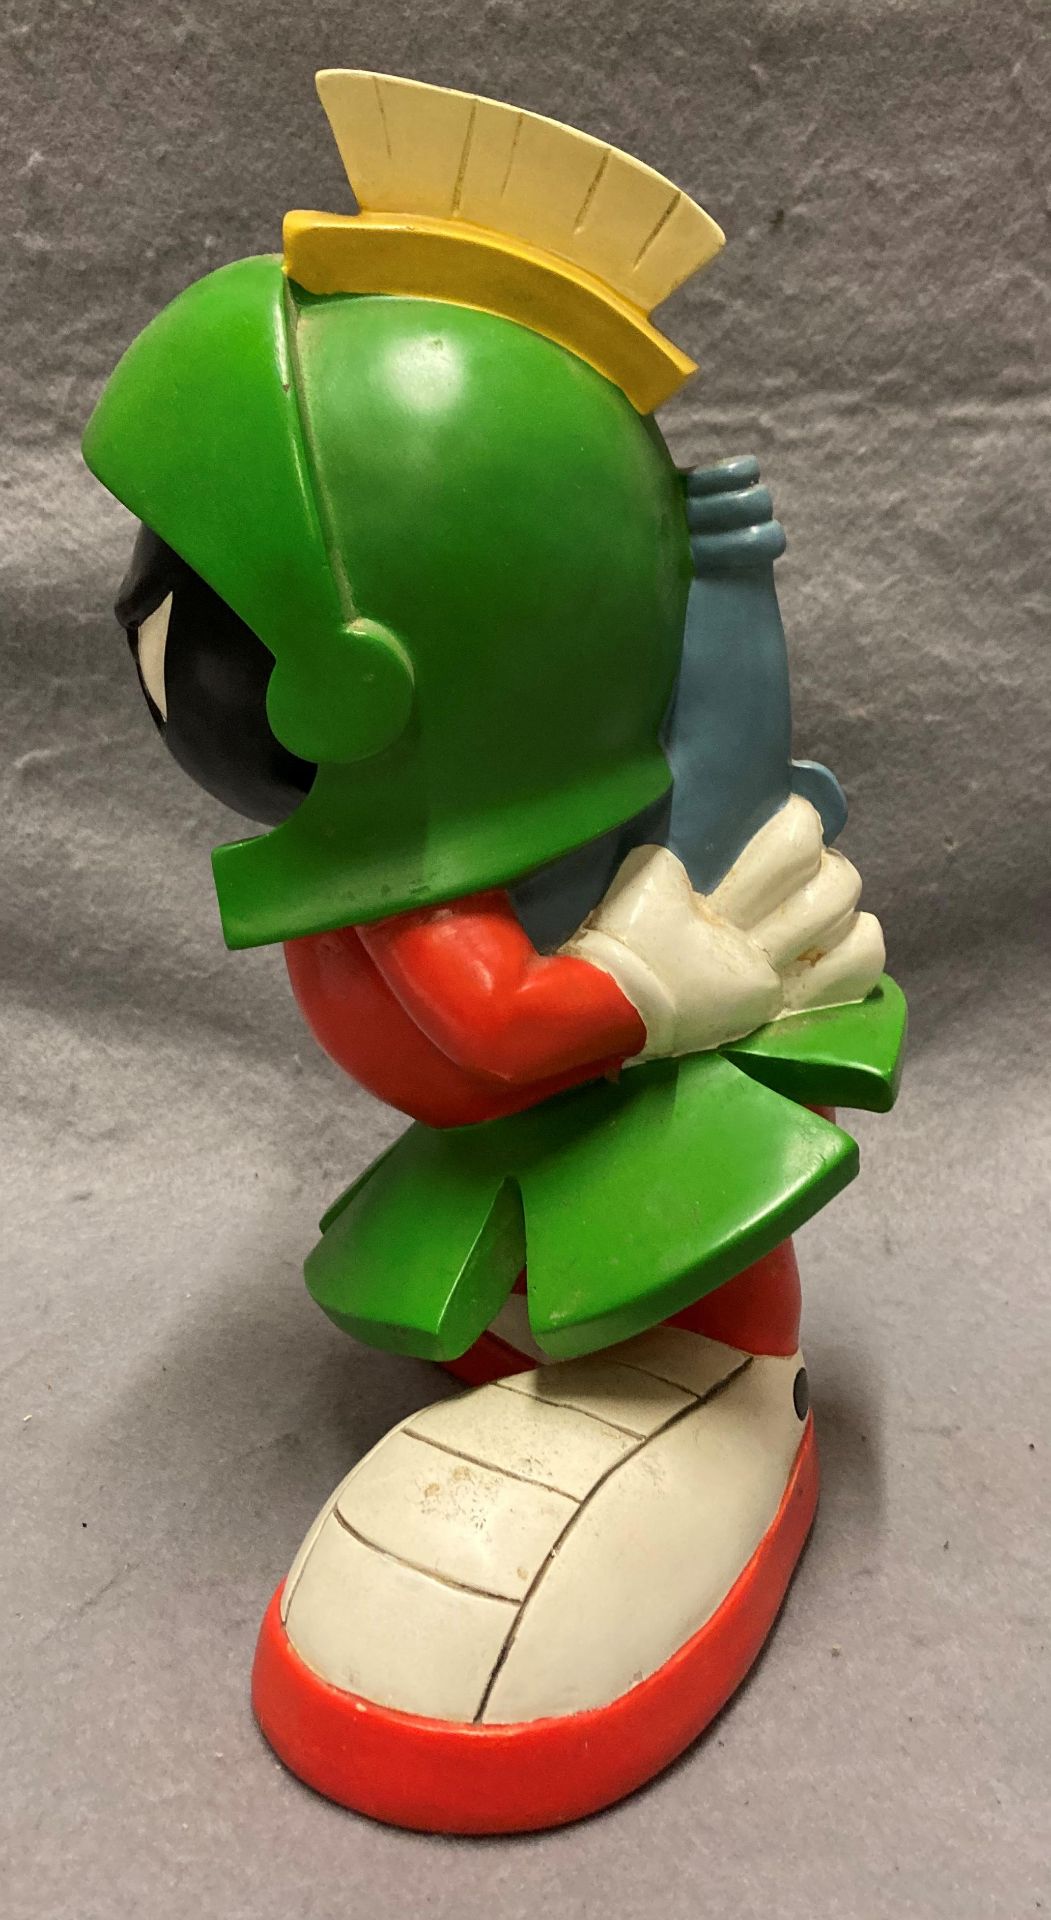 Warner Brothers model of Marvin the Martian, - Image 5 of 8